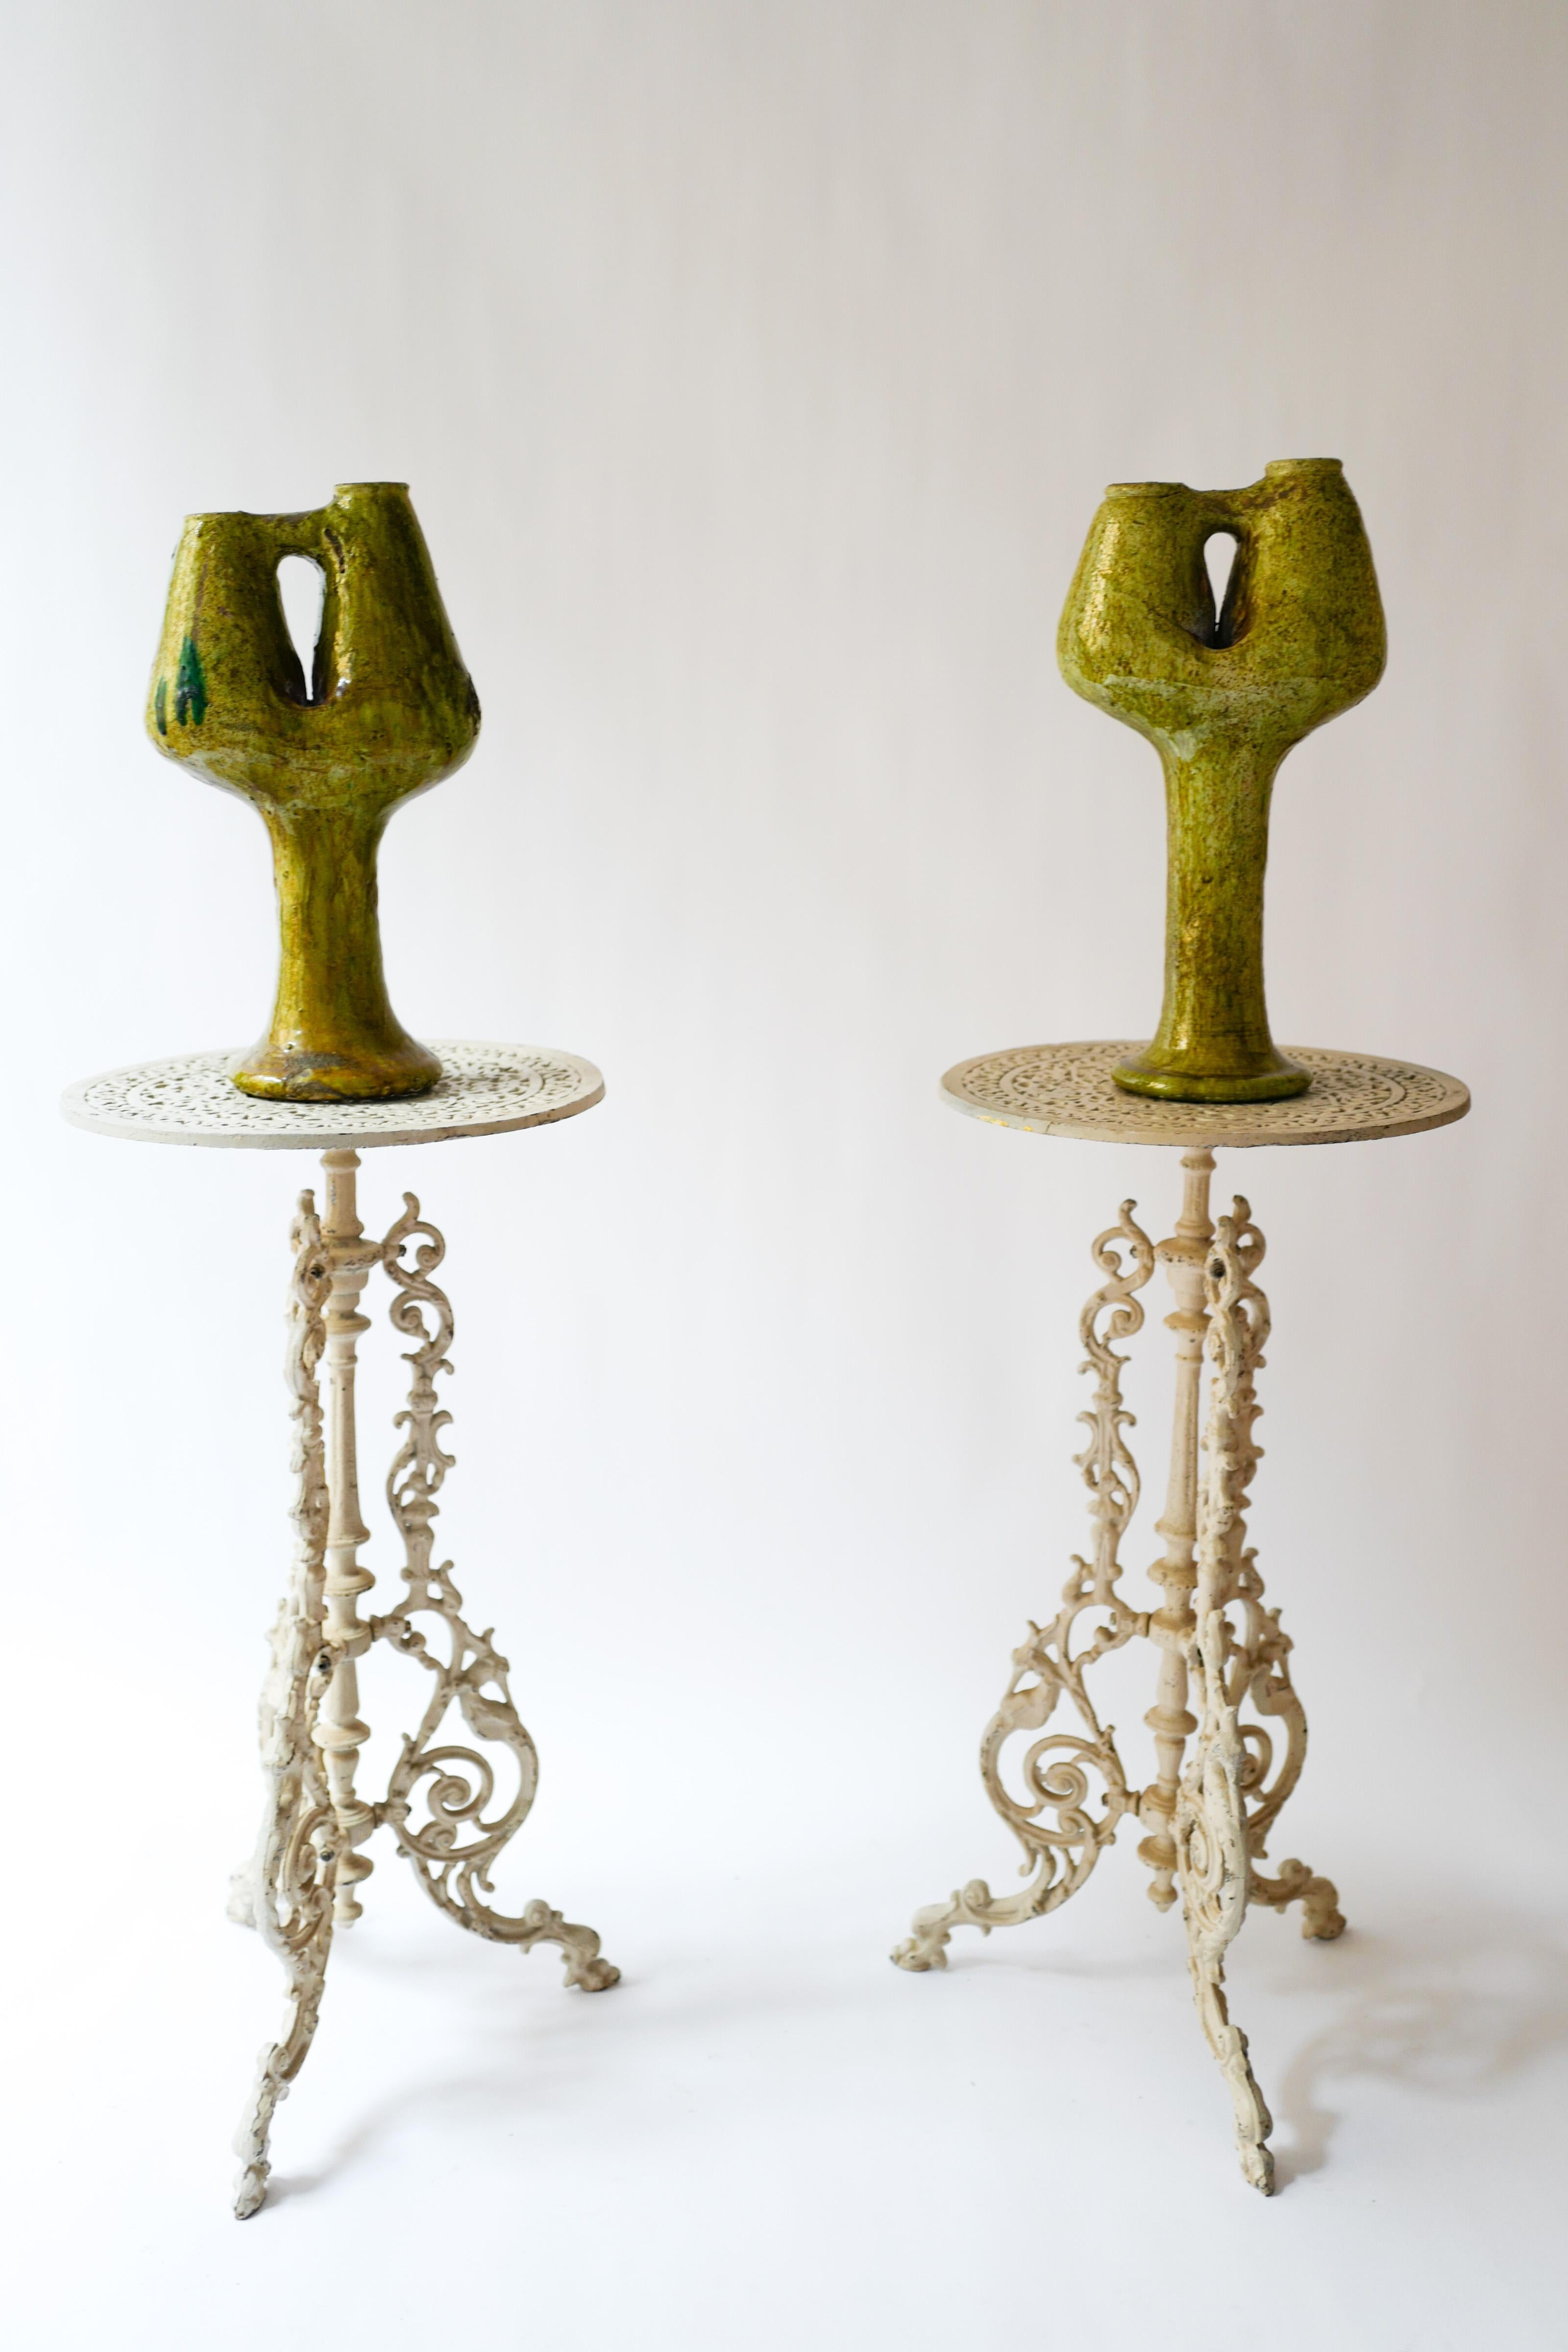 Spanish Colonial Pair of White Spanish Iron Garden Pedestals For Sale